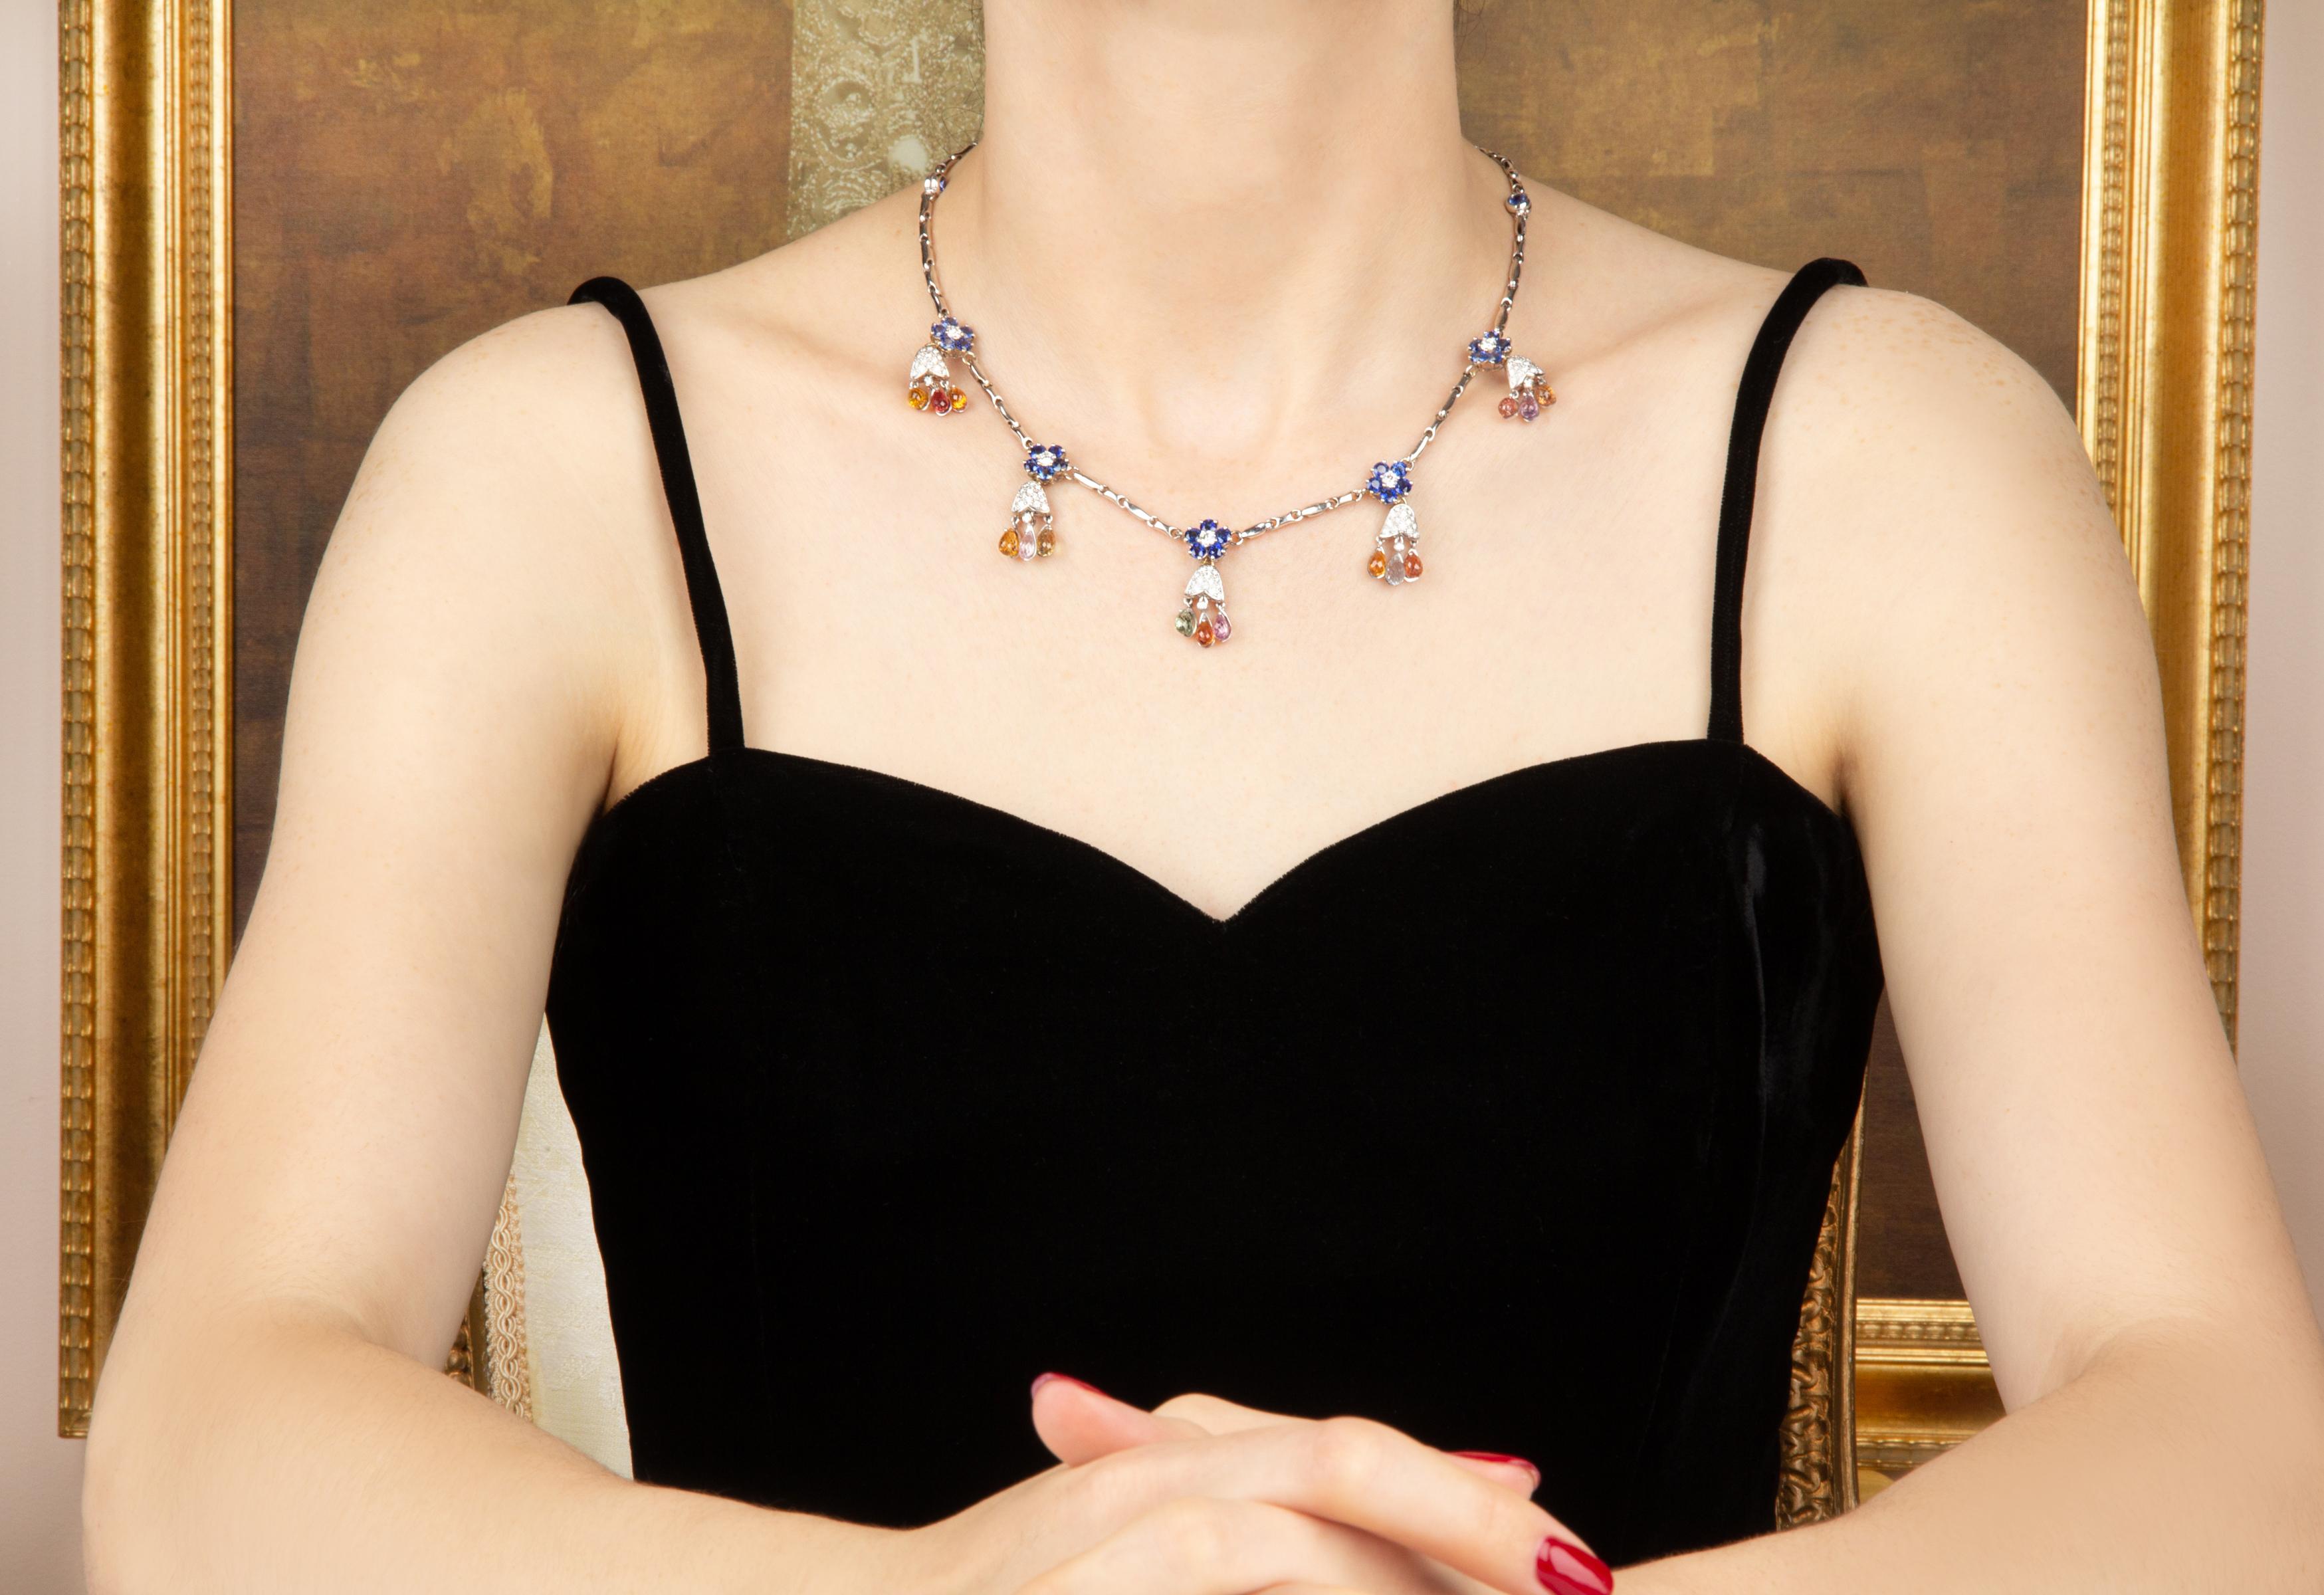 The necklace features five flower-like motifs set with brilliant color faceted round blue Ceylon sapphires and a diamond center. Each flower is attached to a design set with round diamonds en pavé, each in turn suspending three multicolor sapphire